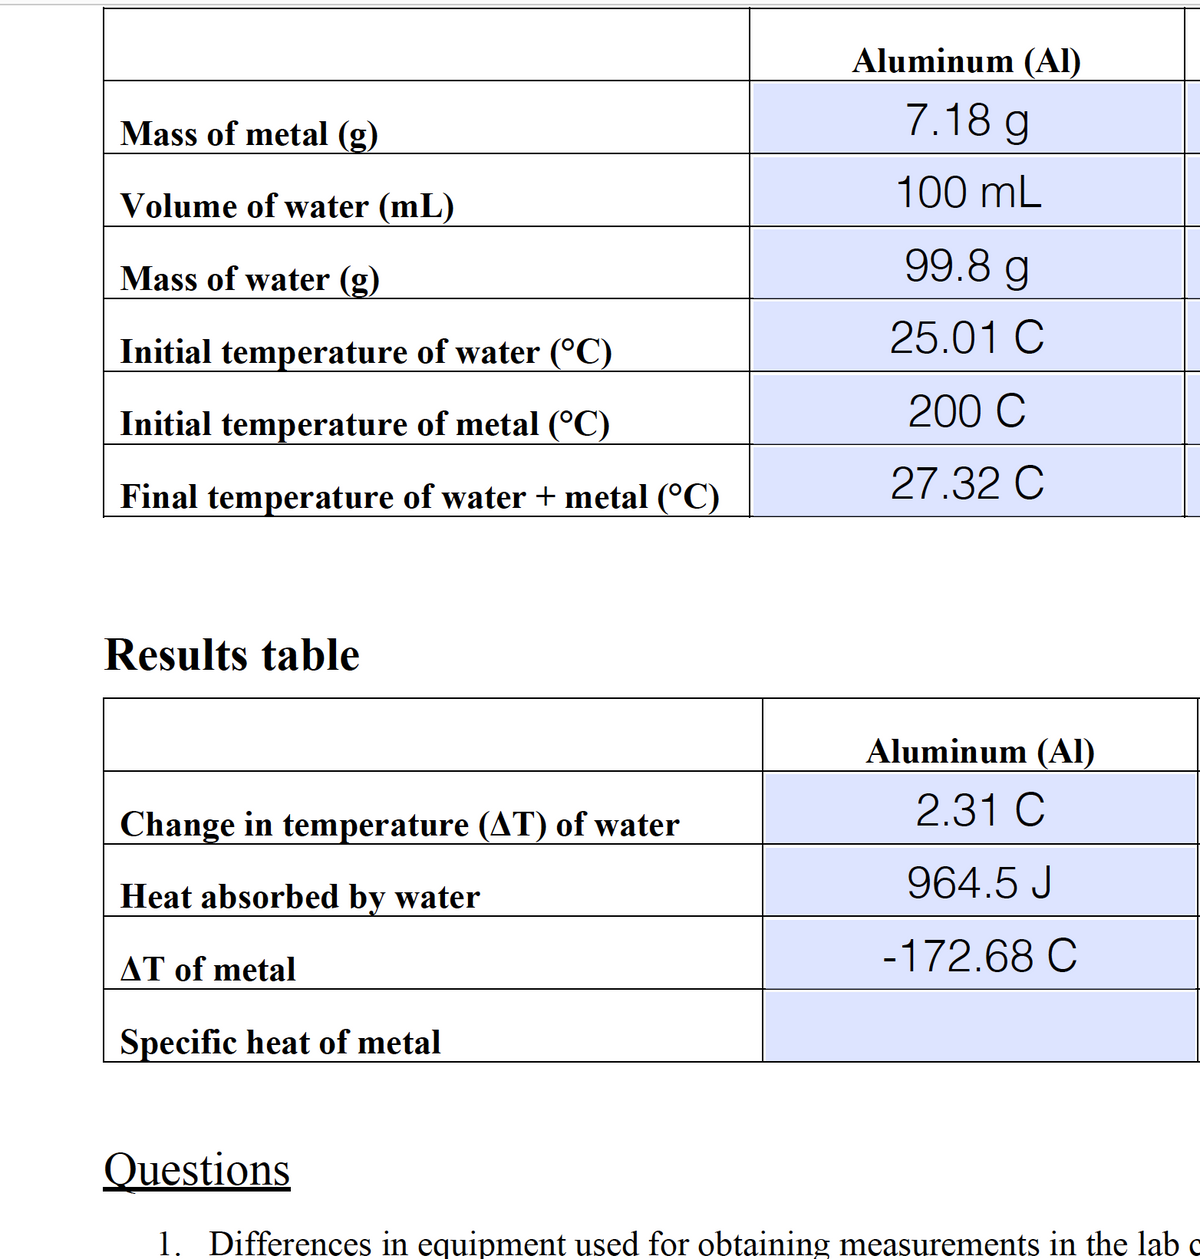 Aluminum (Al)
7.18 g
Mass of metal (g)
Volume of water (mL)
100 mL
Mass of water (g)
99.8 g
25.01 C
Initial temperature of water (°C)
Initial temperature of metal (°C)
200 C
27.32 C
Final temperature of water + metal (°C)
Results table
Aluminum (AI)
Change in temperature (AT) of water
2.31 C
964.5 J
Heat absorbed by water
AT of metal
-172.68 C
Specific heat of metal
Questions
1
Differences in equipment used for obtaining measurements in the lab c
